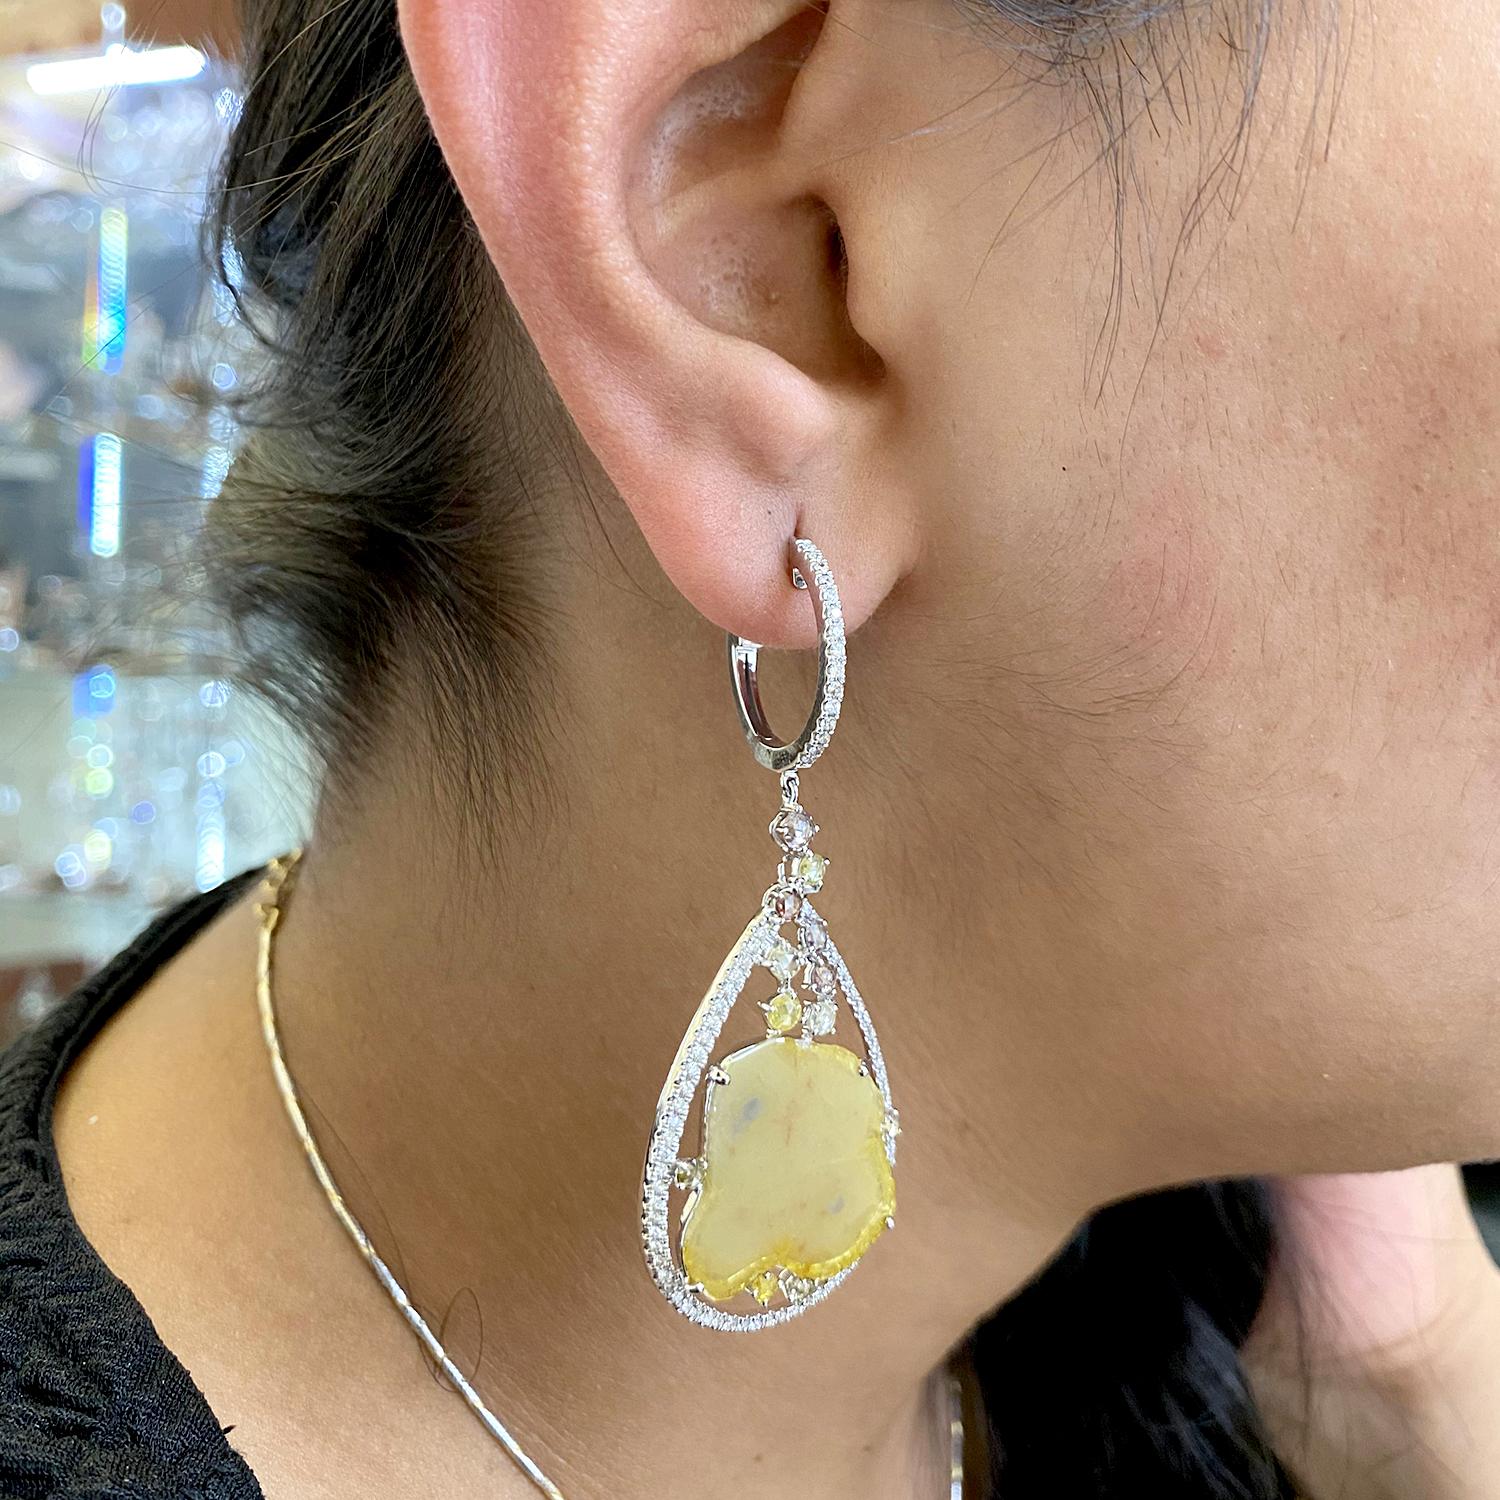 Modern 18k Gold Sliced Yellow Diamond Earring Caged In Pear Shaped Pave Diamond Setting For Sale